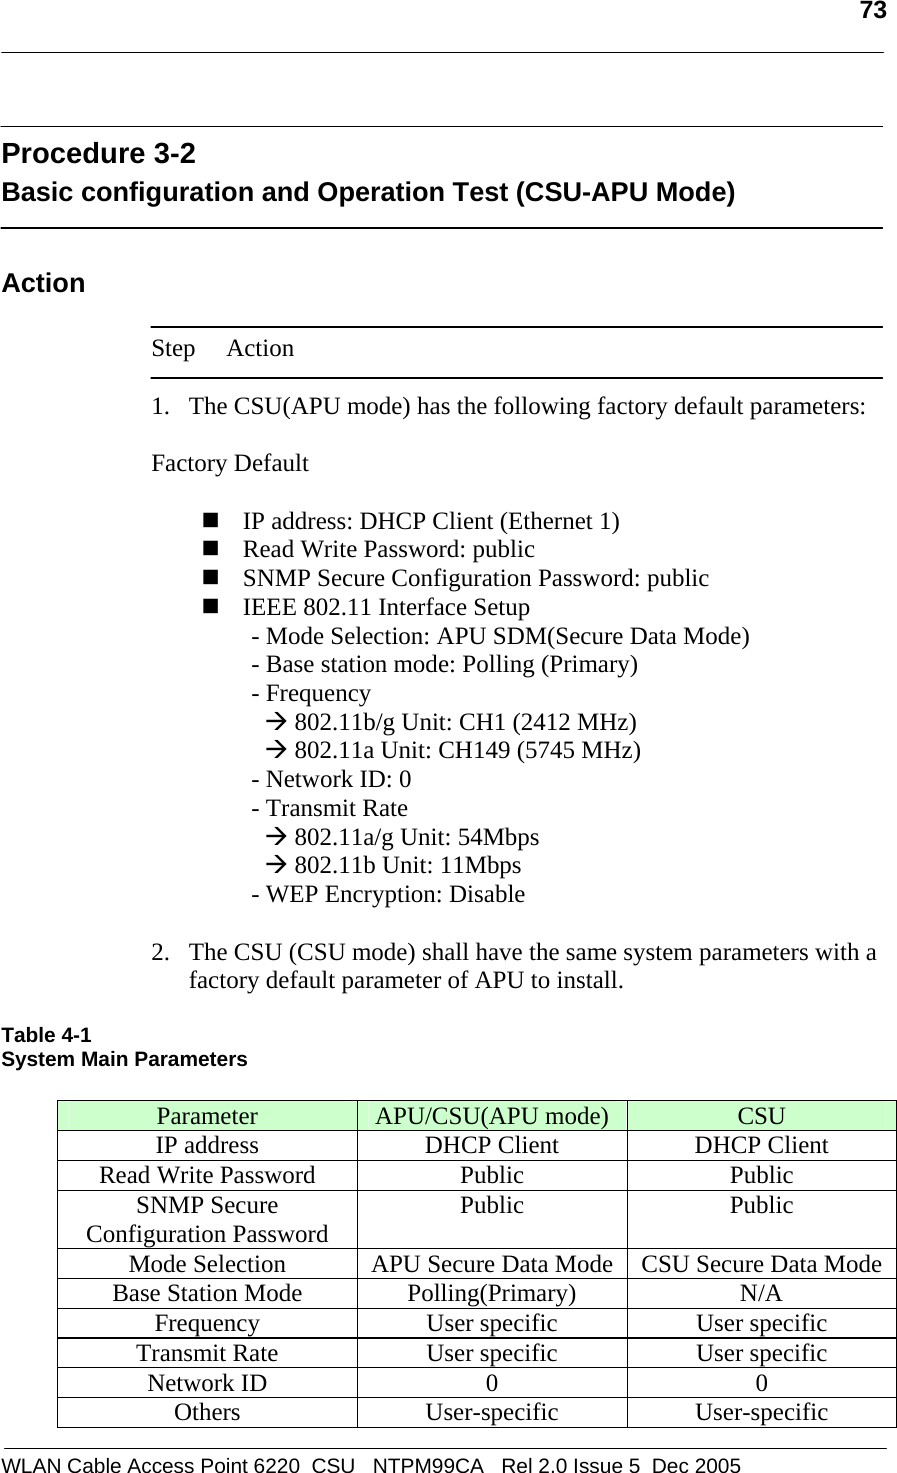   73  WLAN Cable Access Point 6220  CSU   NTPM99CA   Rel 2.0 Issue 5  Dec 2005  Procedure 3-2 Basic configuration and Operation Test (CSU-APU Mode)  Action  Step Action  1. The CSU(APU mode) has the following factory default parameters:  Factory Default   IP address: DHCP Client (Ethernet 1)  Read Write Password: public  SNMP Secure Configuration Password: public  IEEE 802.11 Interface Setup - Mode Selection: APU SDM(Secure Data Mode)  - Base station mode: Polling (Primary)             - Frequency Æ 802.11b/g Unit: CH1 (2412 MHz)  Æ 802.11a Unit: CH149 (5745 MHz)              - Network ID: 0 - Transmit Rate Æ 802.11a/g Unit: 54Mbps Æ 802.11b Unit: 11Mbps - WEP Encryption: Disable  2. The CSU (CSU mode) shall have the same system parameters with a factory default parameter of APU to install.   Table 4-1 System Main Parameters  Parameter  APU/CSU(APU mode) CSU IP address  DHCP Client  DHCP Client Read Write Password  Public  Public SNMP Secure Configuration Password  Public Public Mode Selection  APU Secure Data Mode CSU Secure Data ModeBase Station Mode  Polling(Primary)  N/A Frequency  User specific  User specific Transmit Rate  User specific  User specific Network ID  0  0 Others User-specific User-specific 